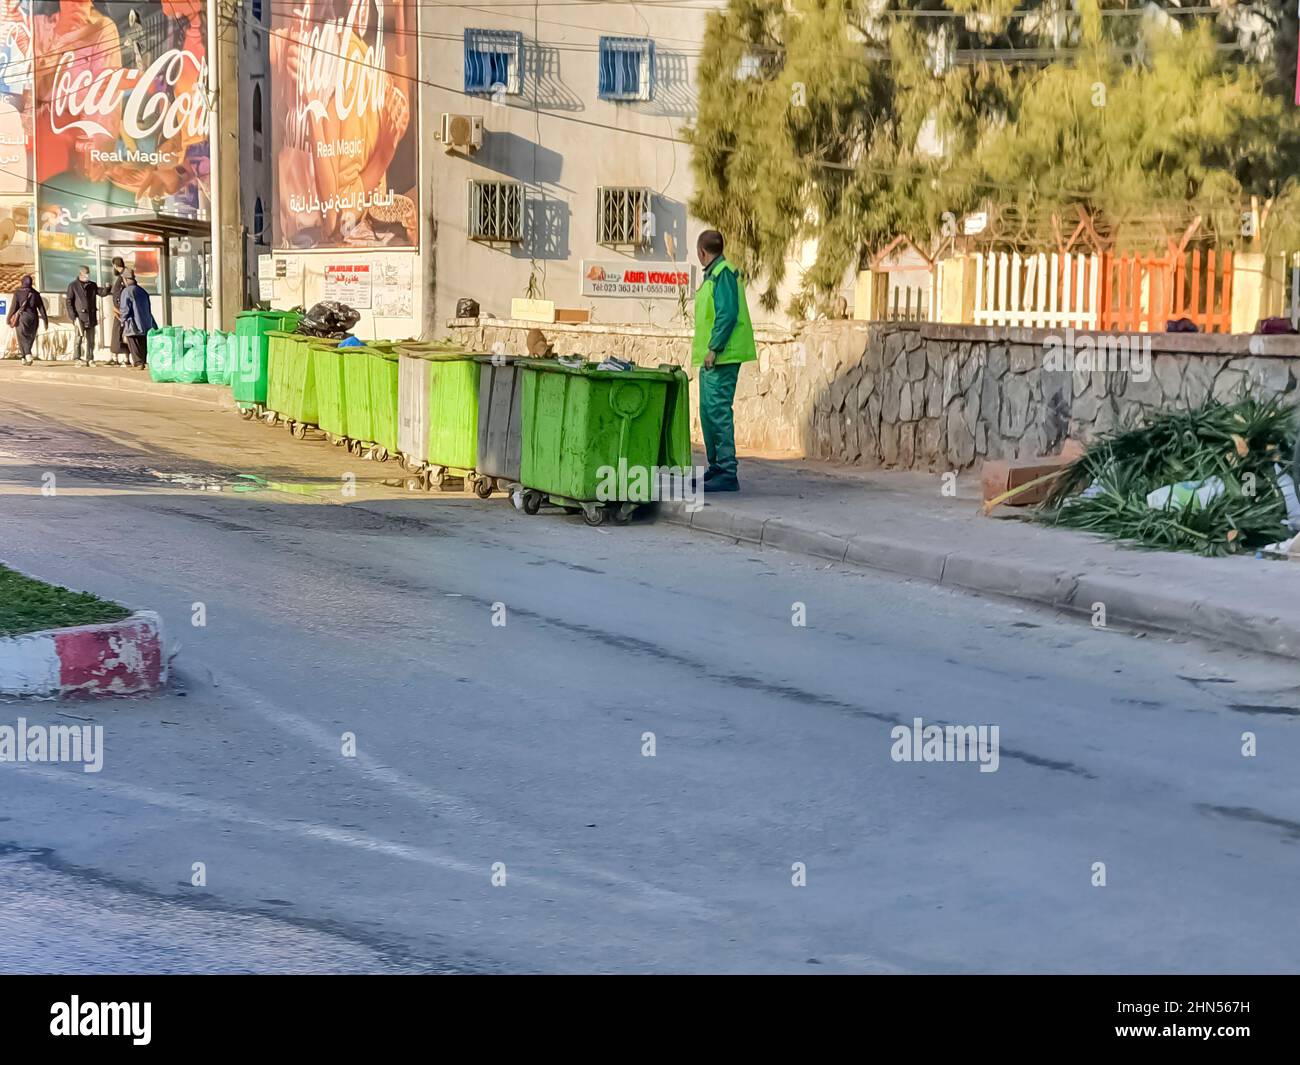 Cheraga, Algiers. Bus station, dumpsters, green bags rubbish palmtree branches, cartons waste. An unrecognizable dustman alone in the sidewalk. Stock Photo